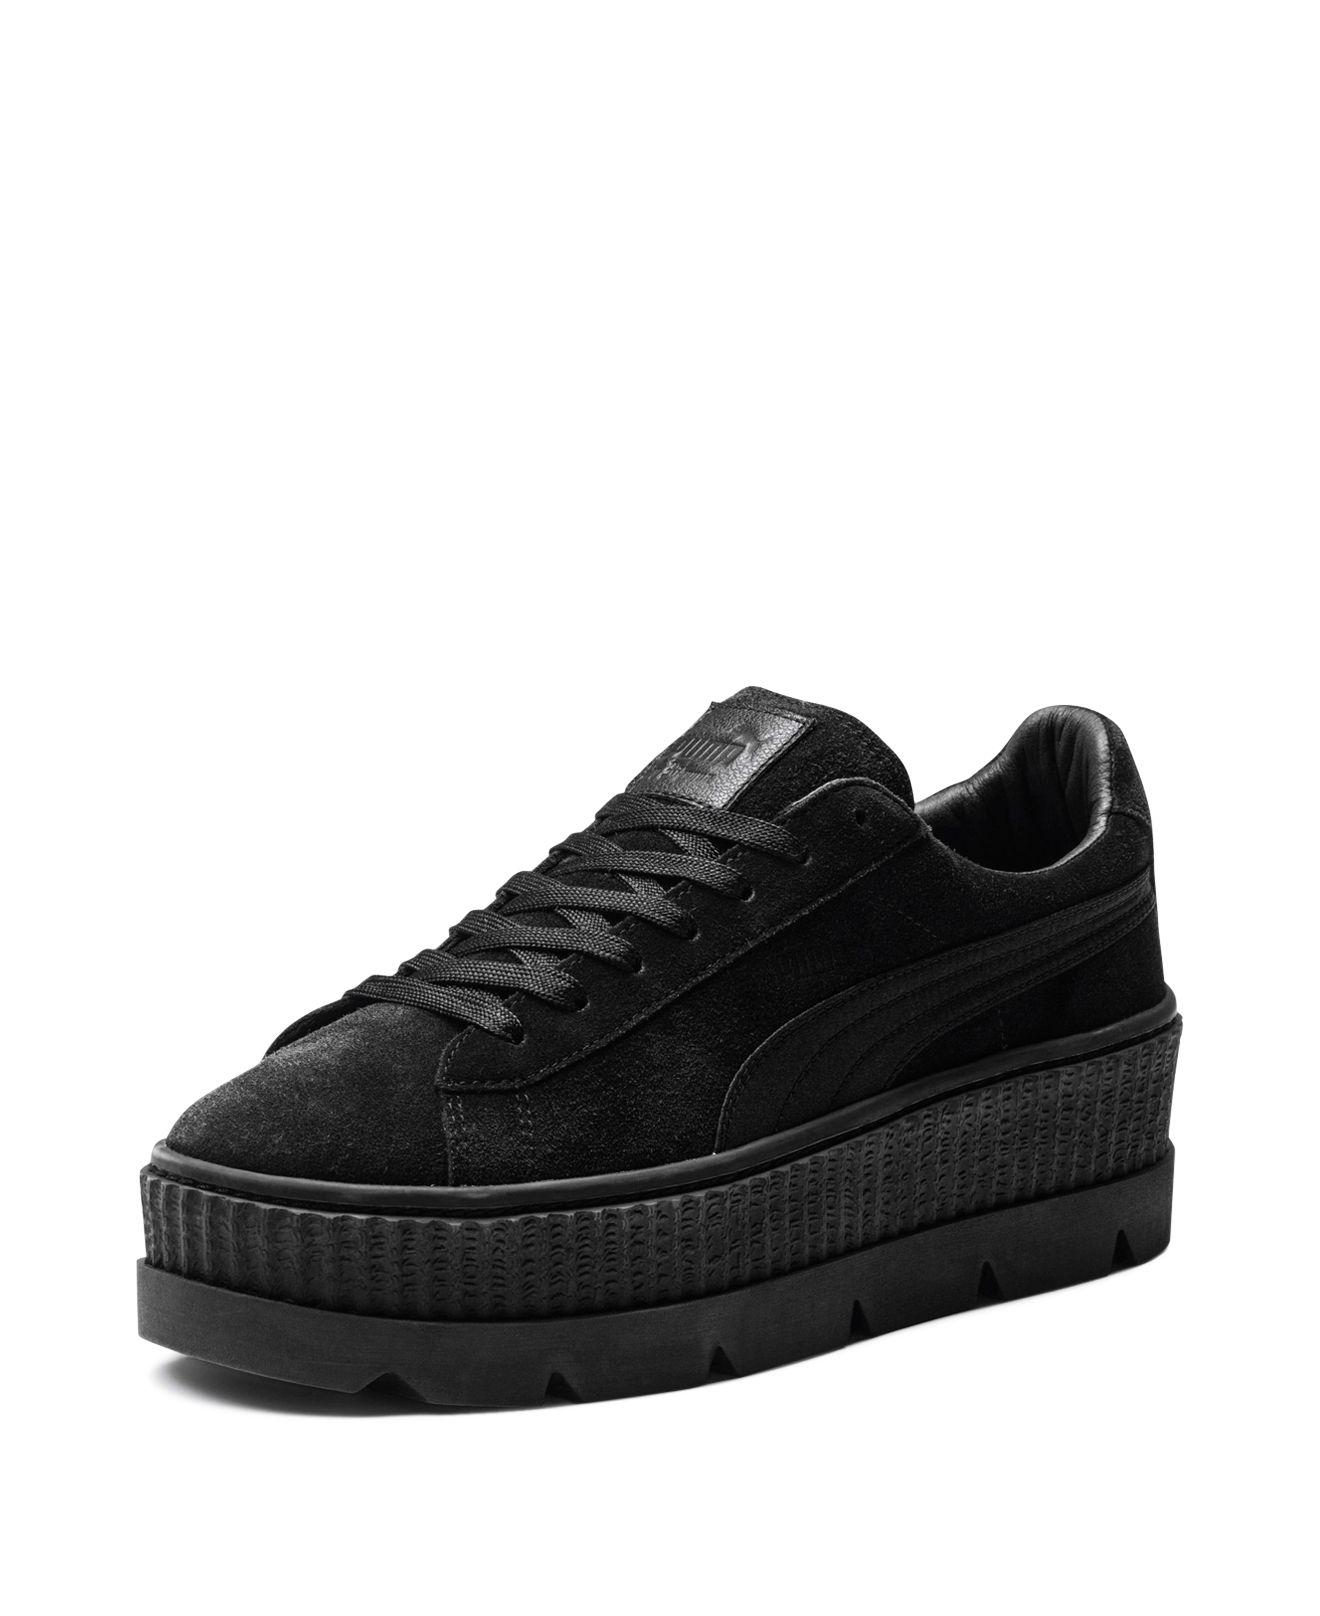 Suede Cleated Creeper Platform Sneakers 